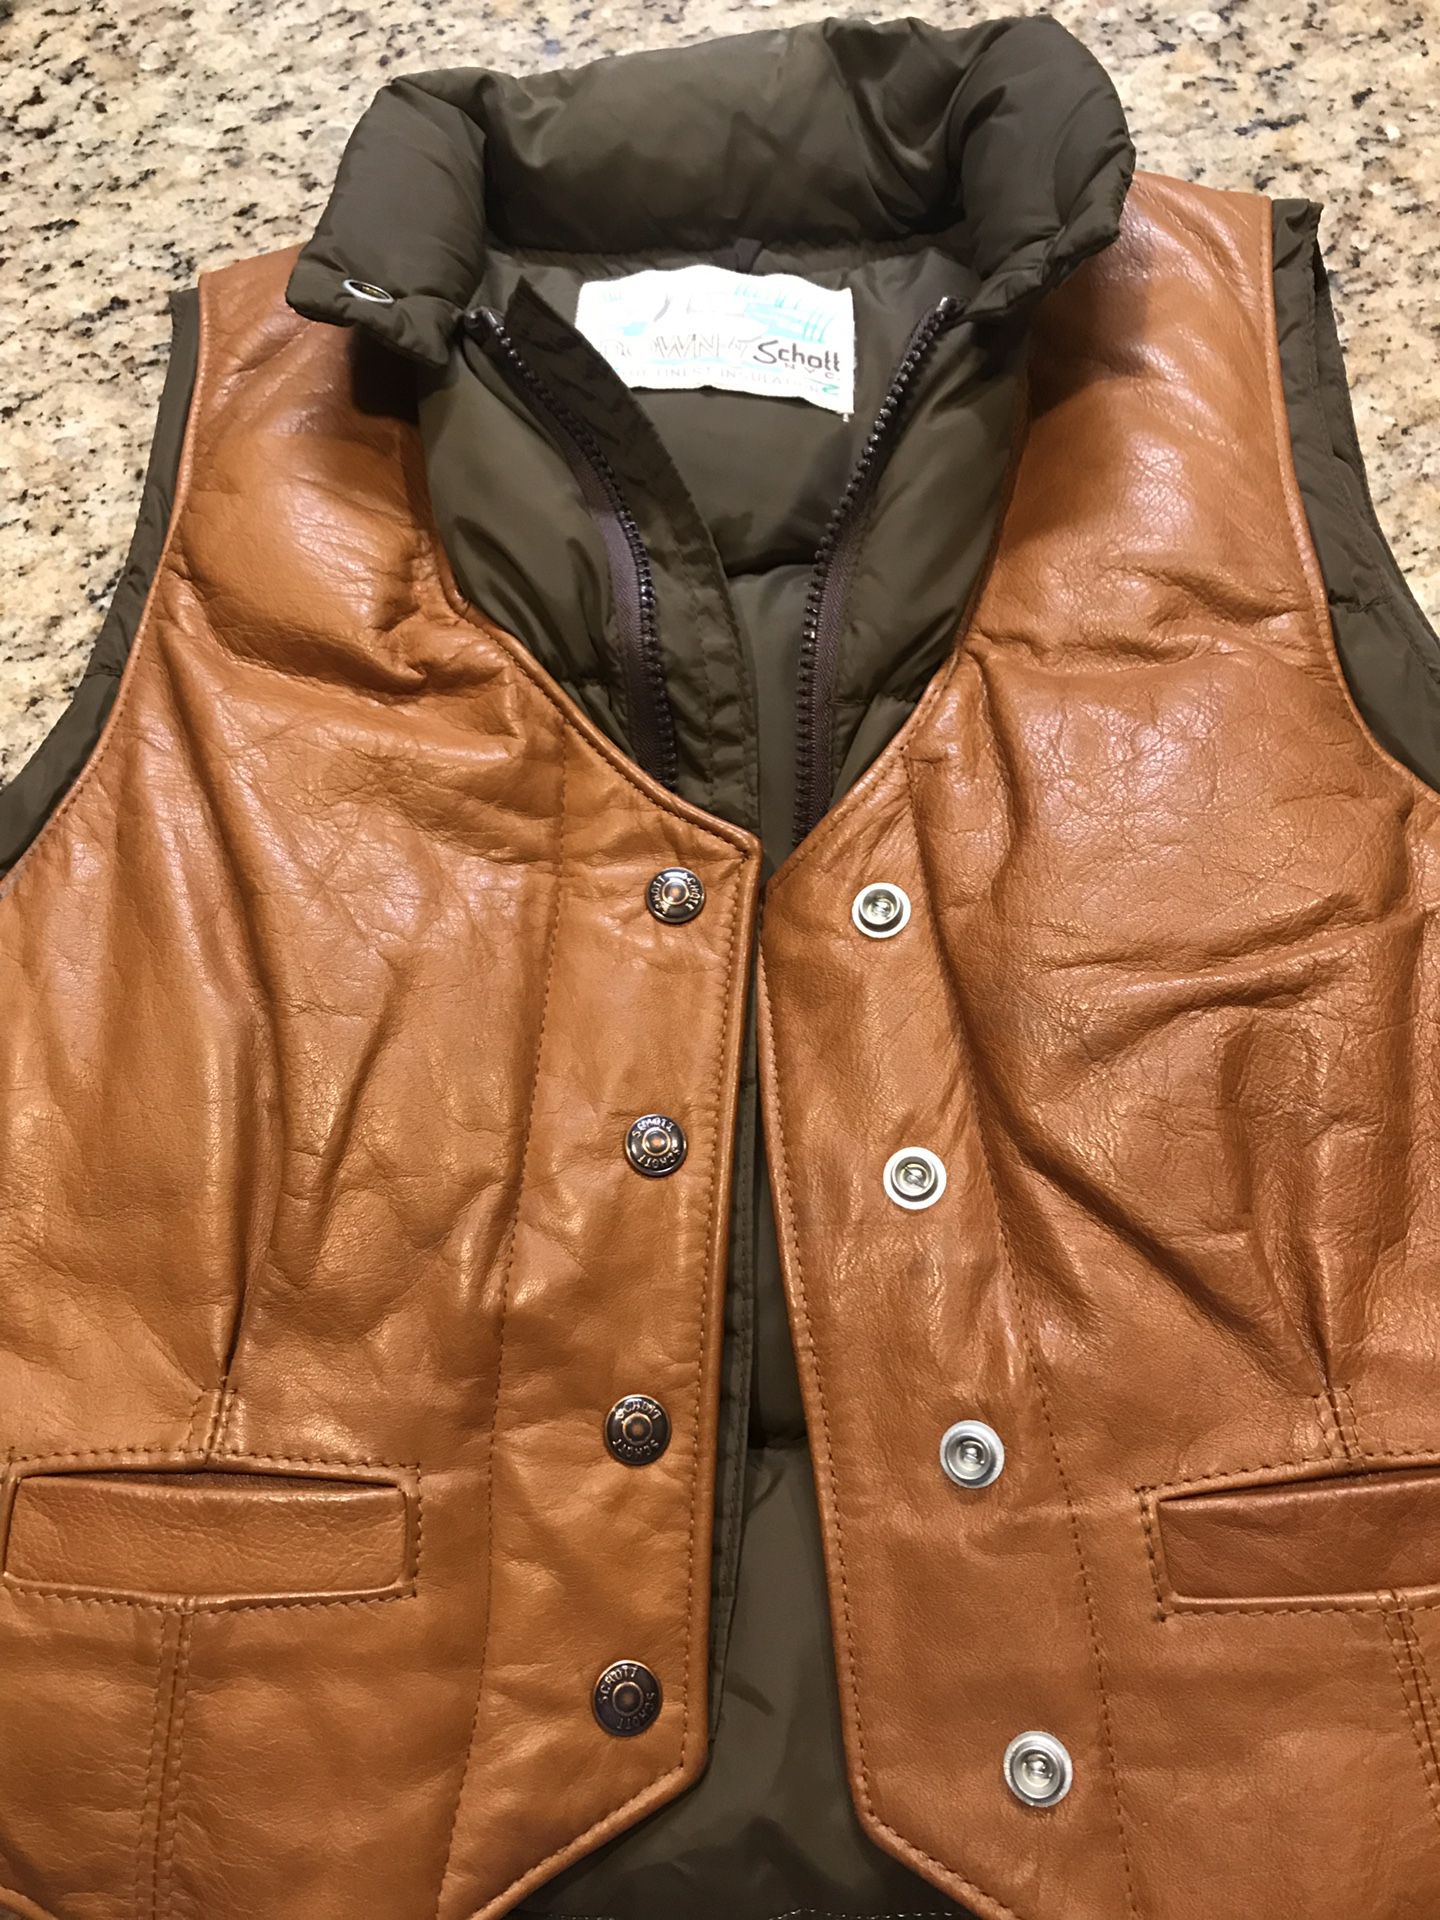 Women’s Vintage 80s Scott Down and Leather Vest- Size Small